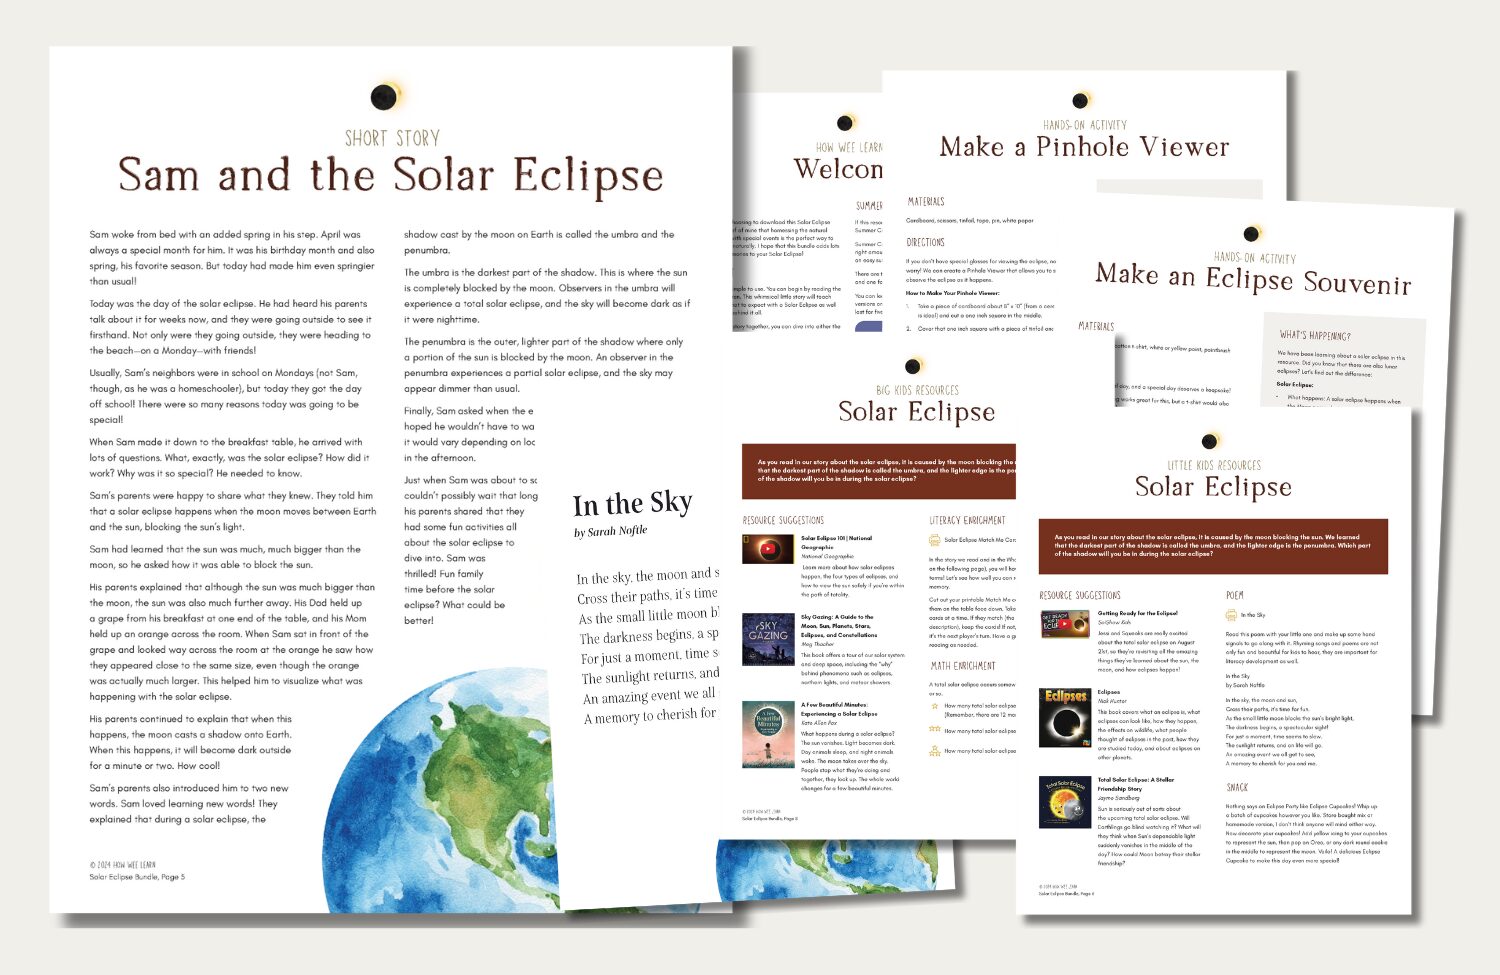 Solar Eclipse Activity Bundle for 2-12 Year Olds, Free Printable